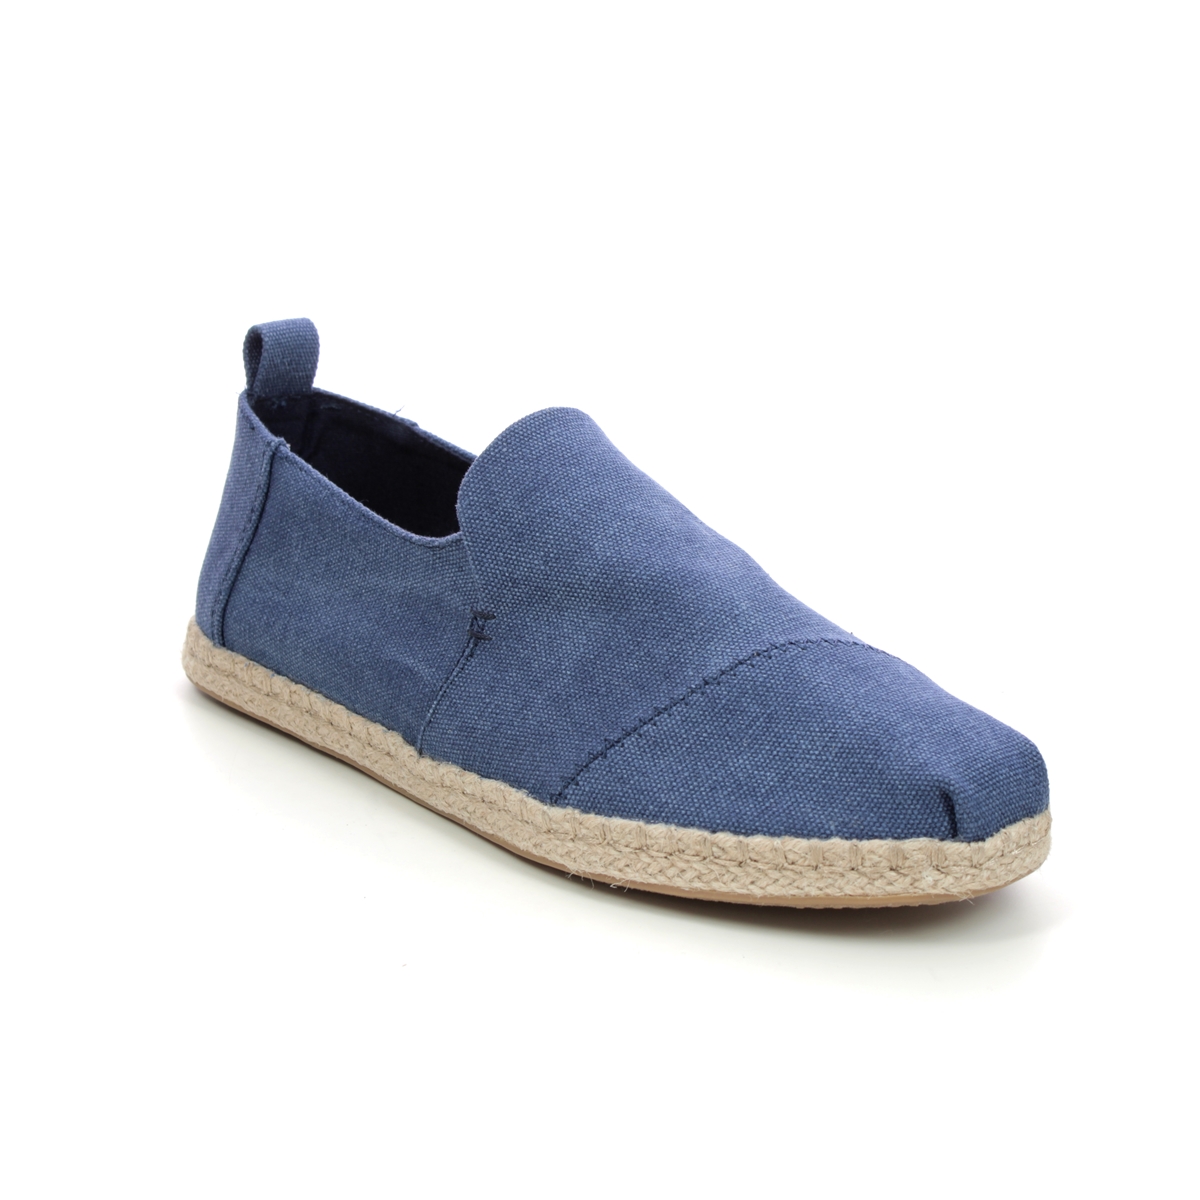 Toms Deconstructed Navy Mens Slip-on Shoes 10011623-70